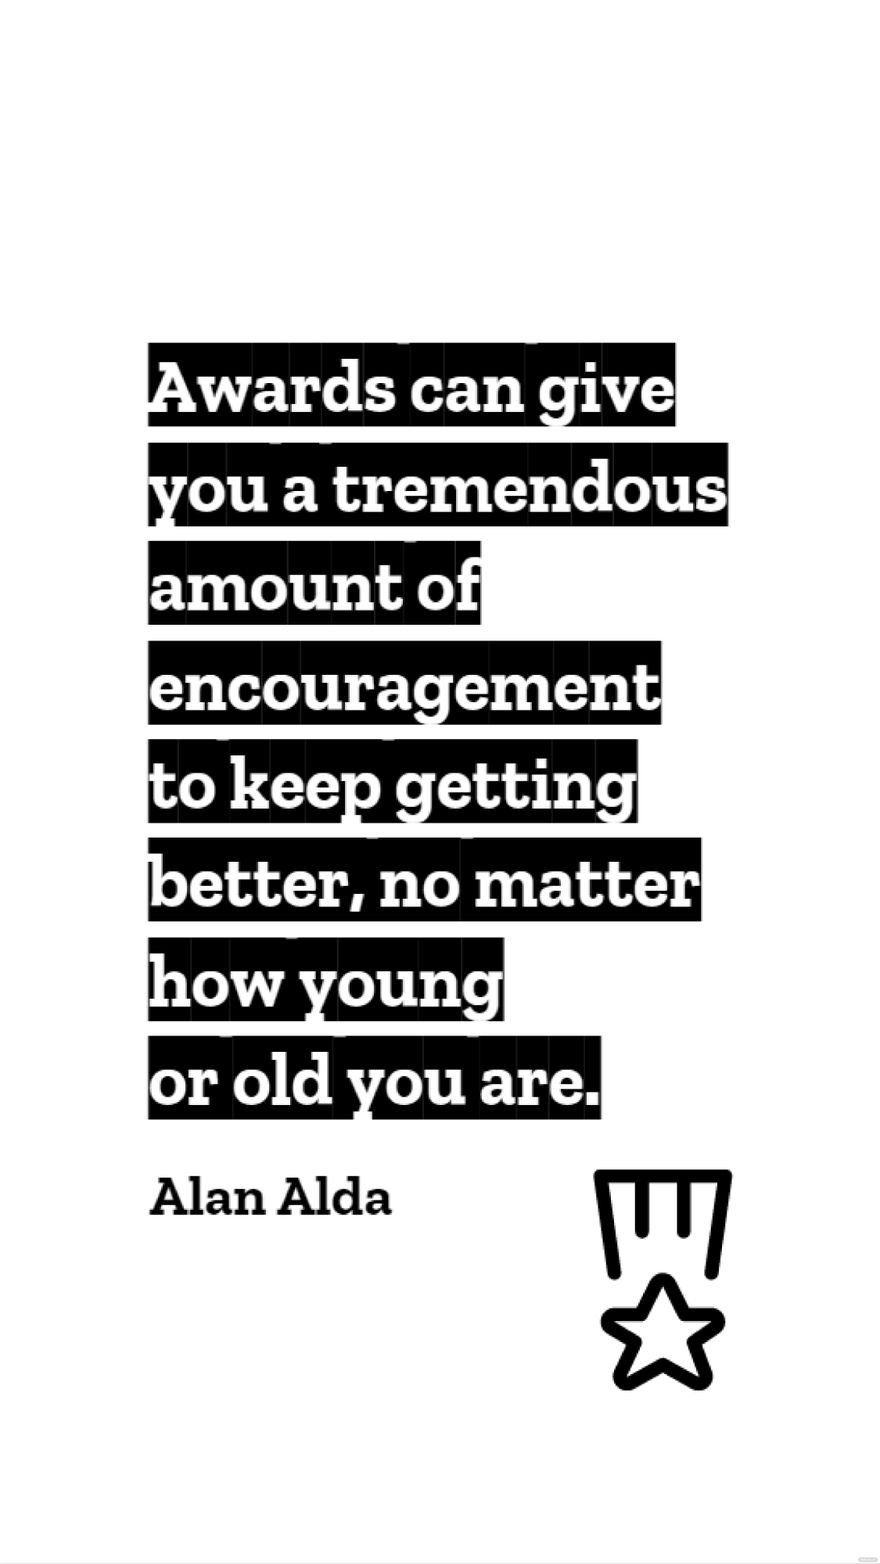 Alan Alda - Awards can give you a tremendous amount of encouragement to keep getting better, no matter how young or old you are.